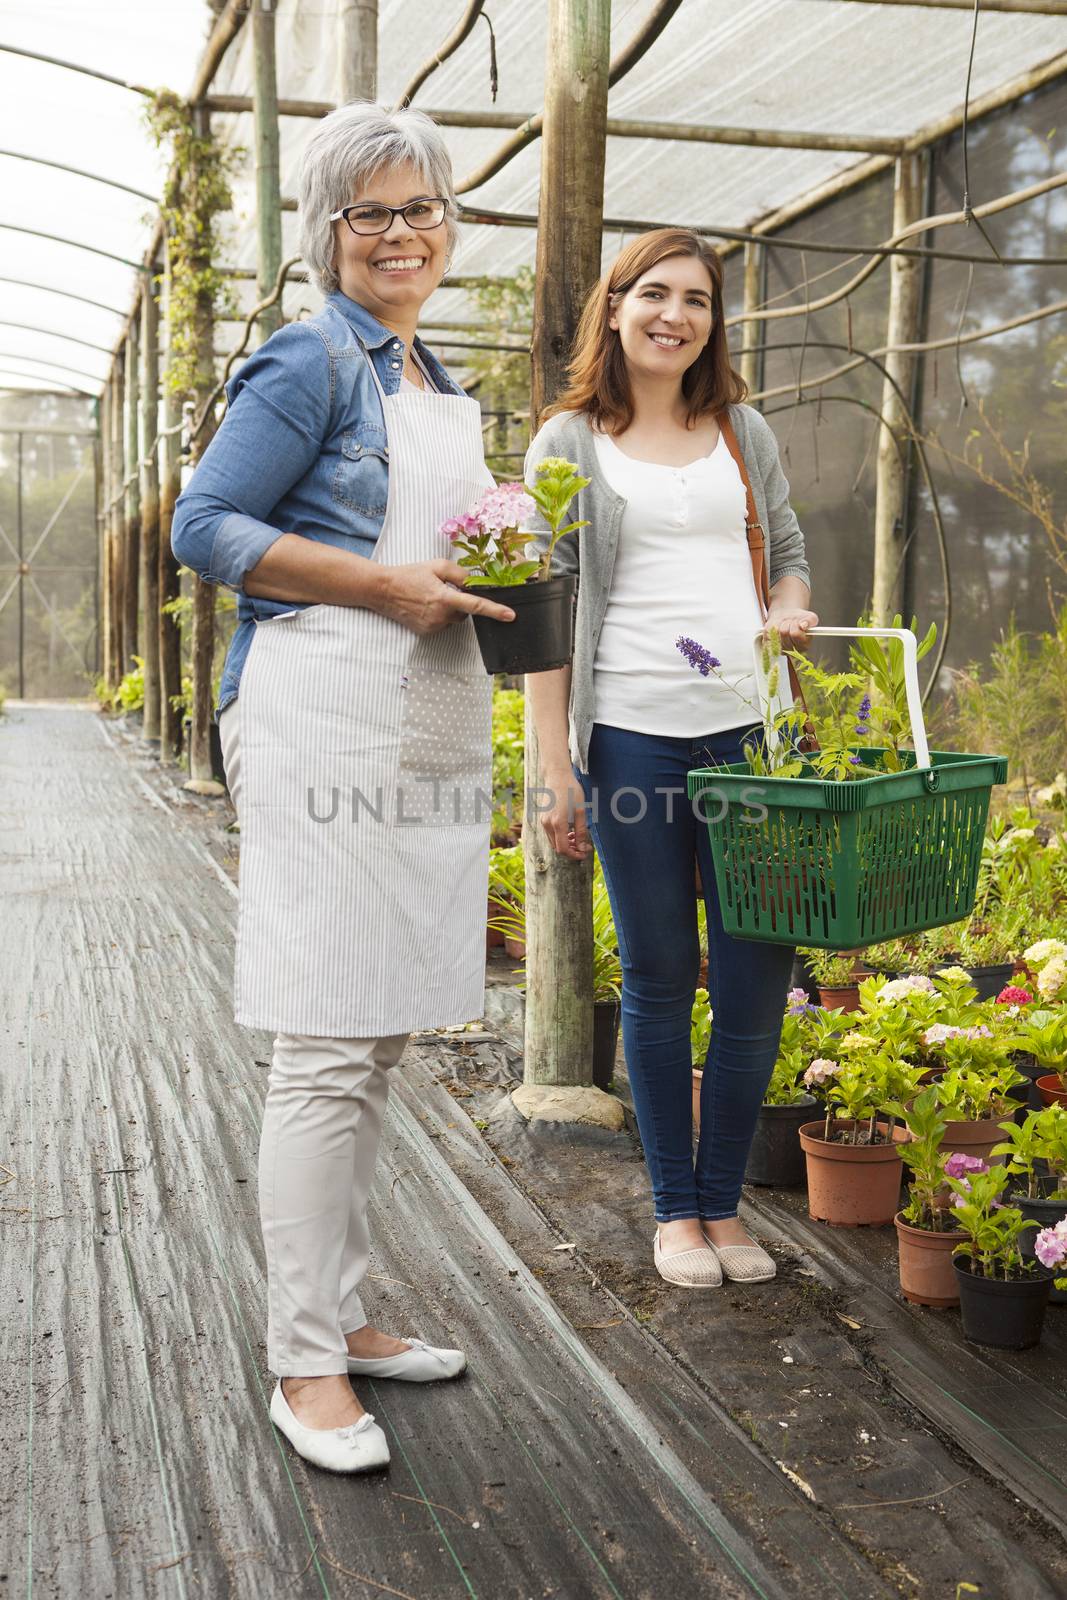 Worker and customer in a green house by Iko